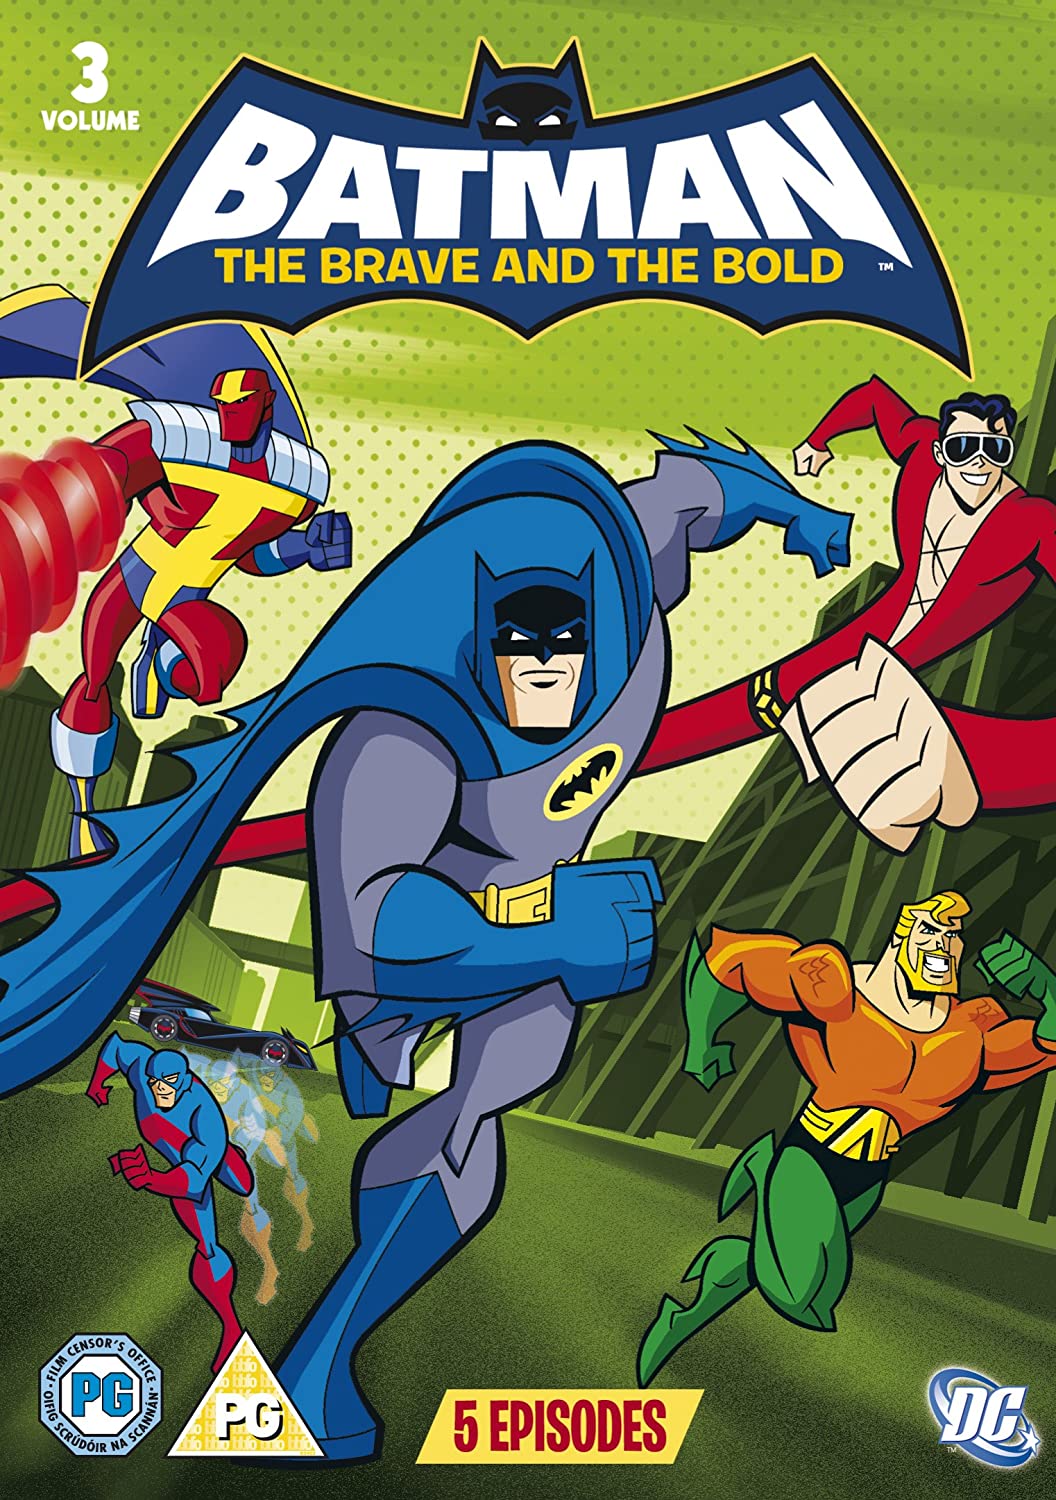 Batman - The Brave And The Bold: Volume 3 [2010] - Action/Superhero [DVD]